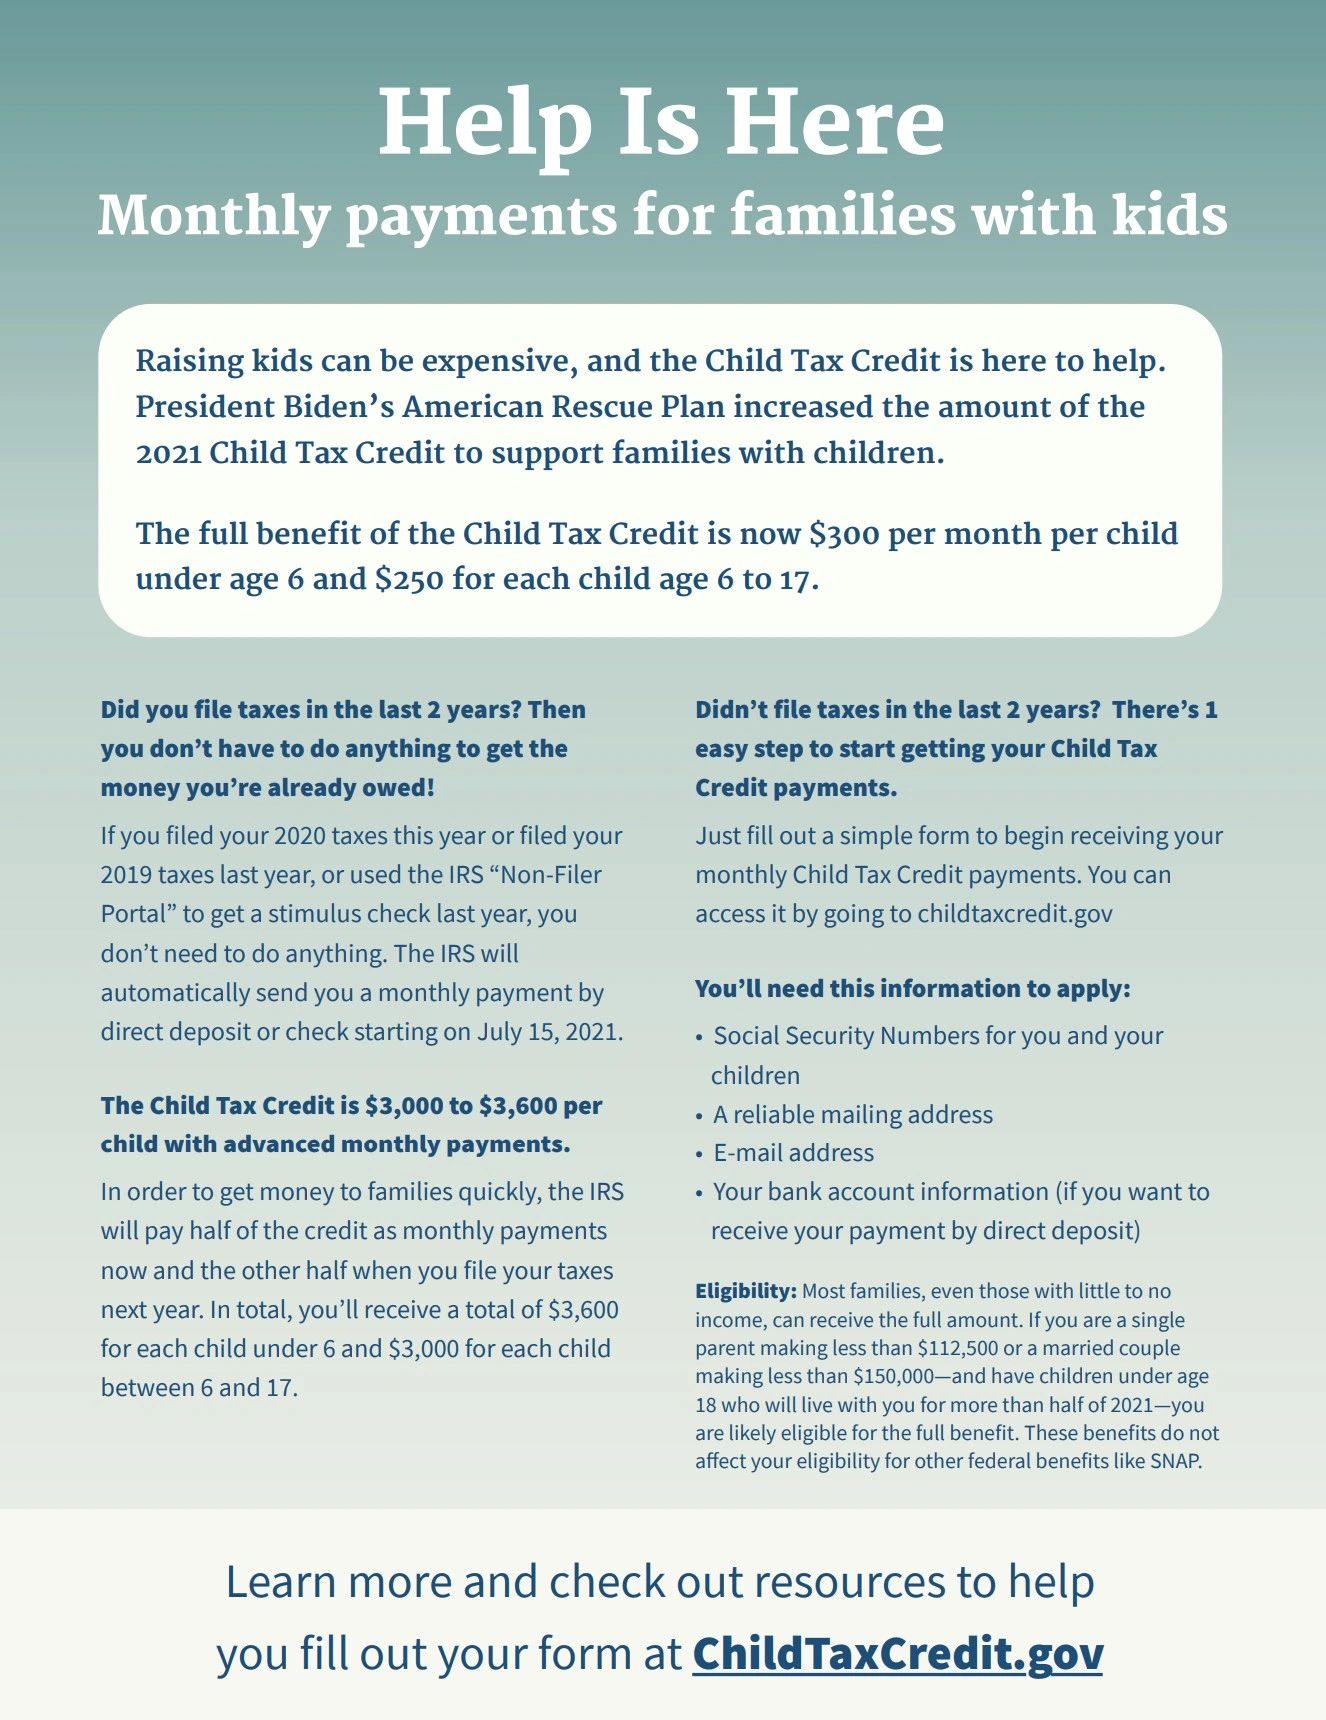 2021 Child Tax Credit To Support Families With Children